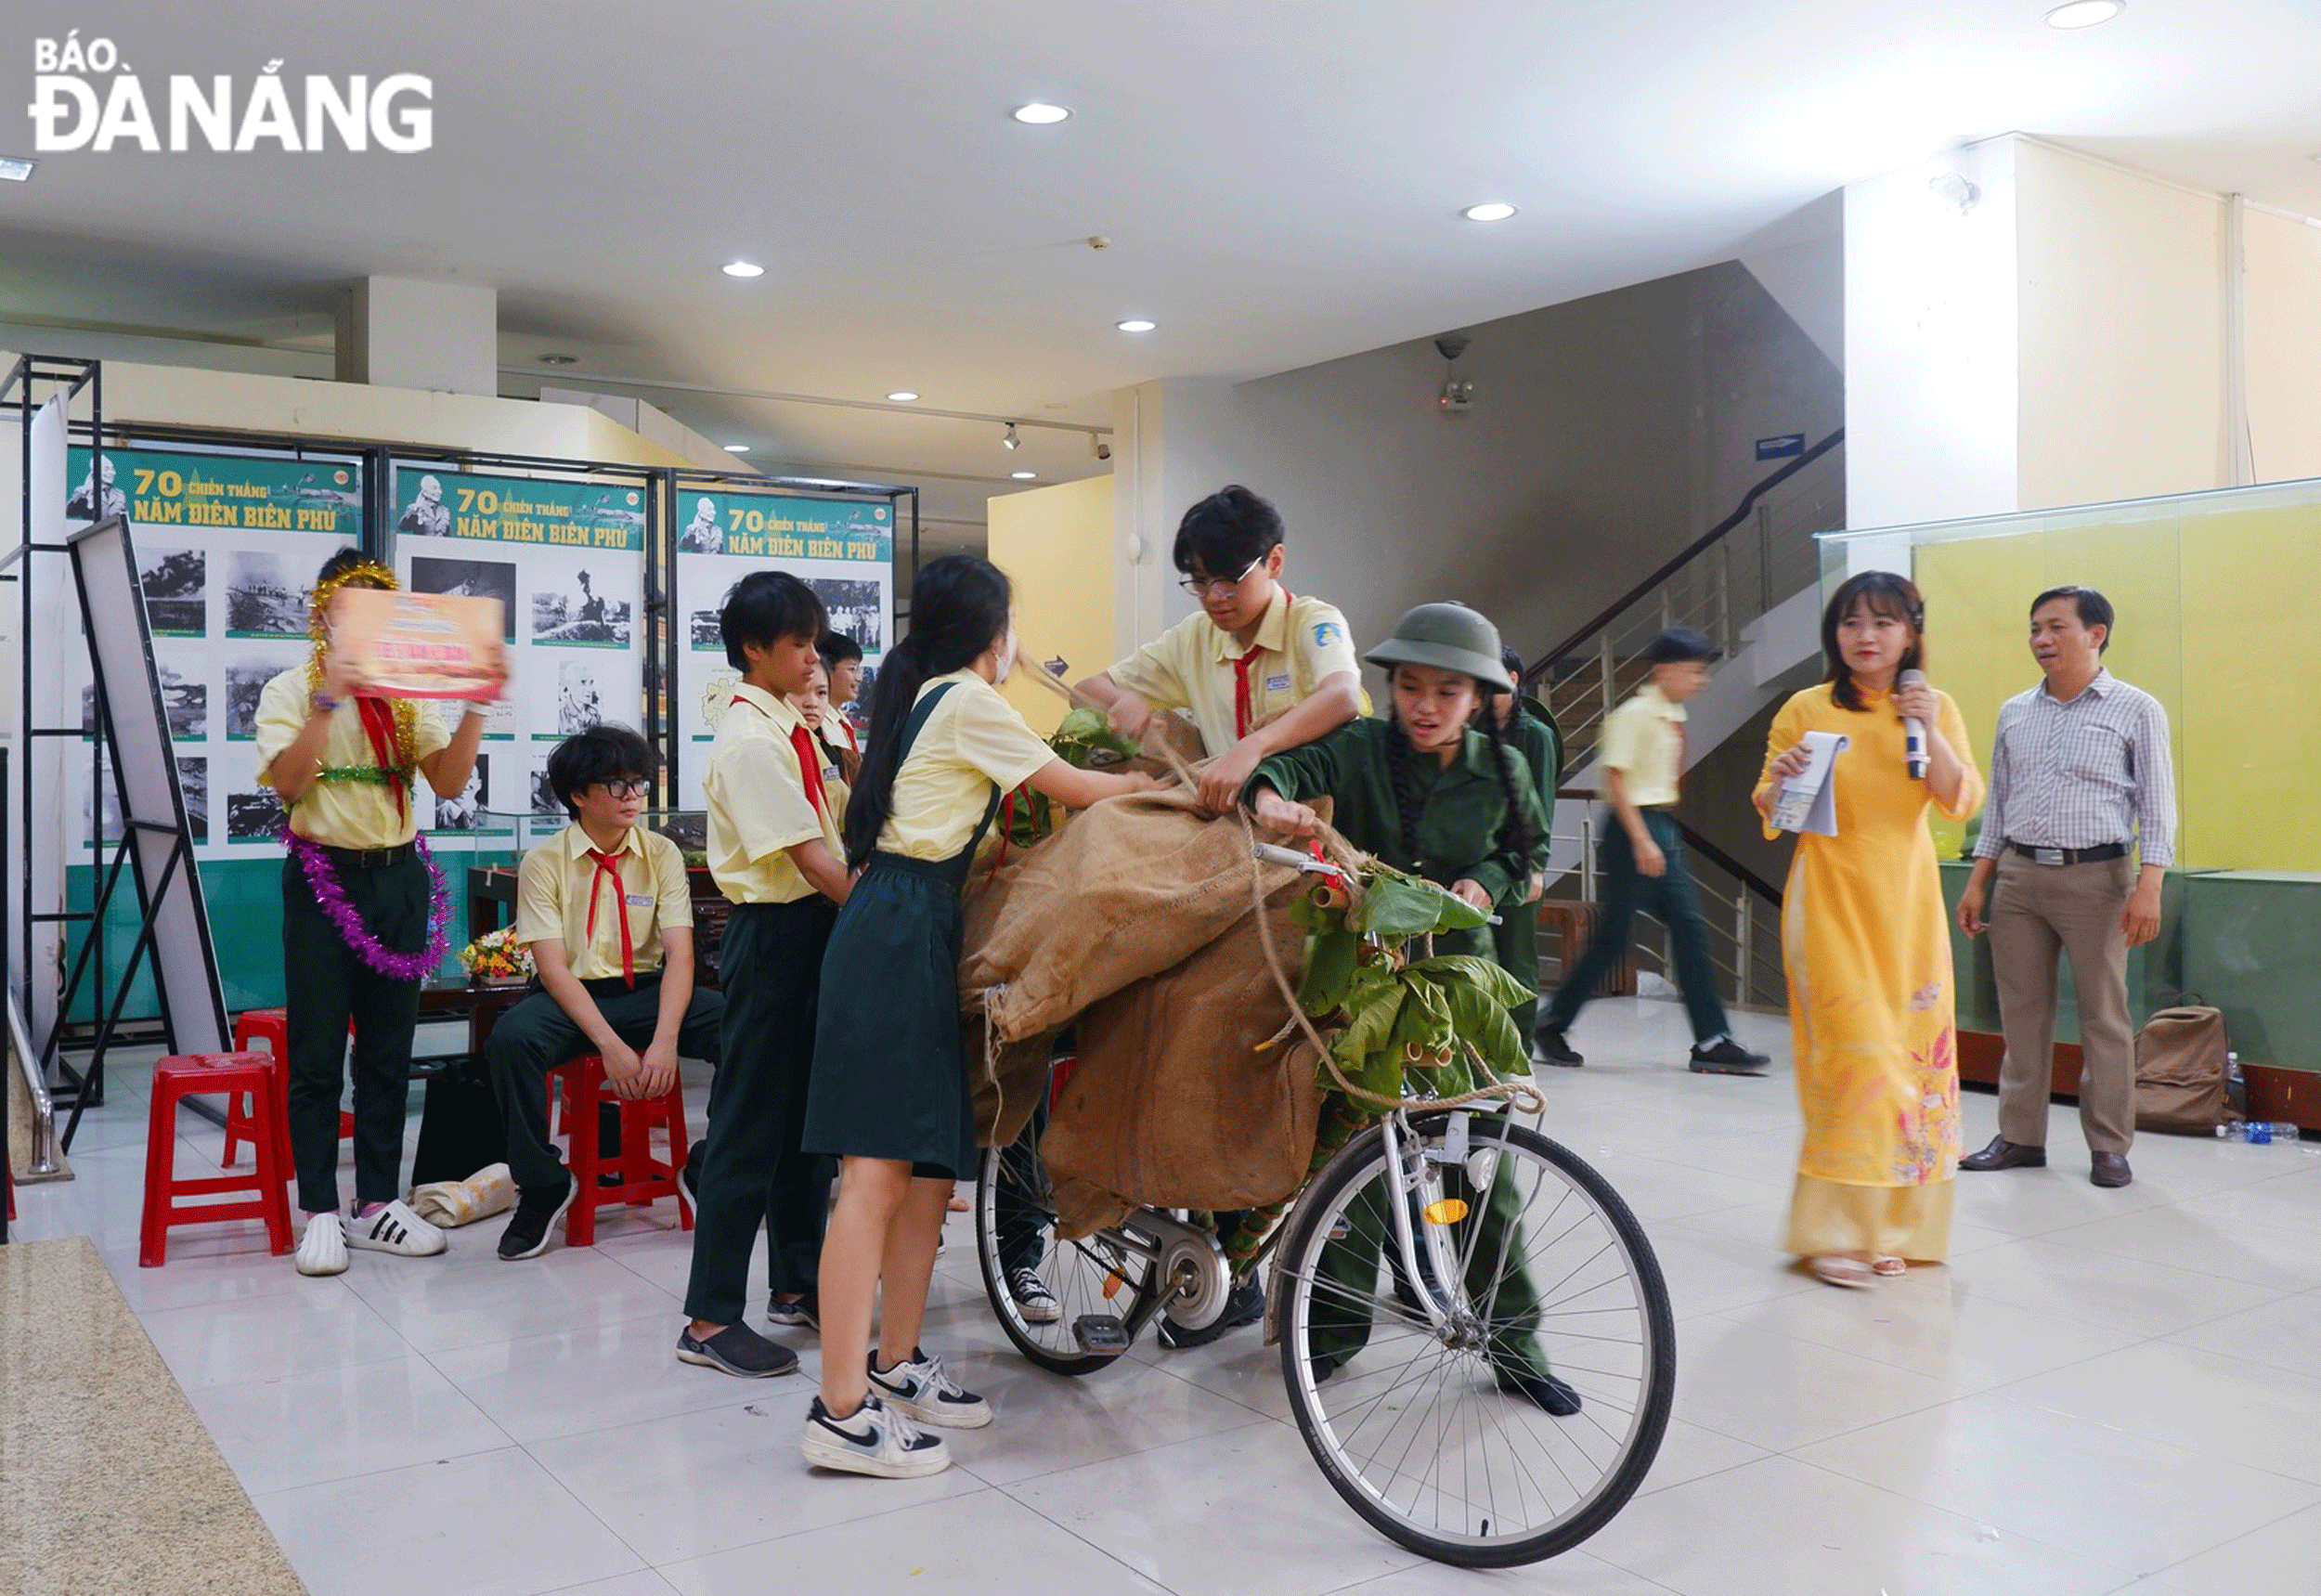 Role of museum in promoting education and experience in Da Nang